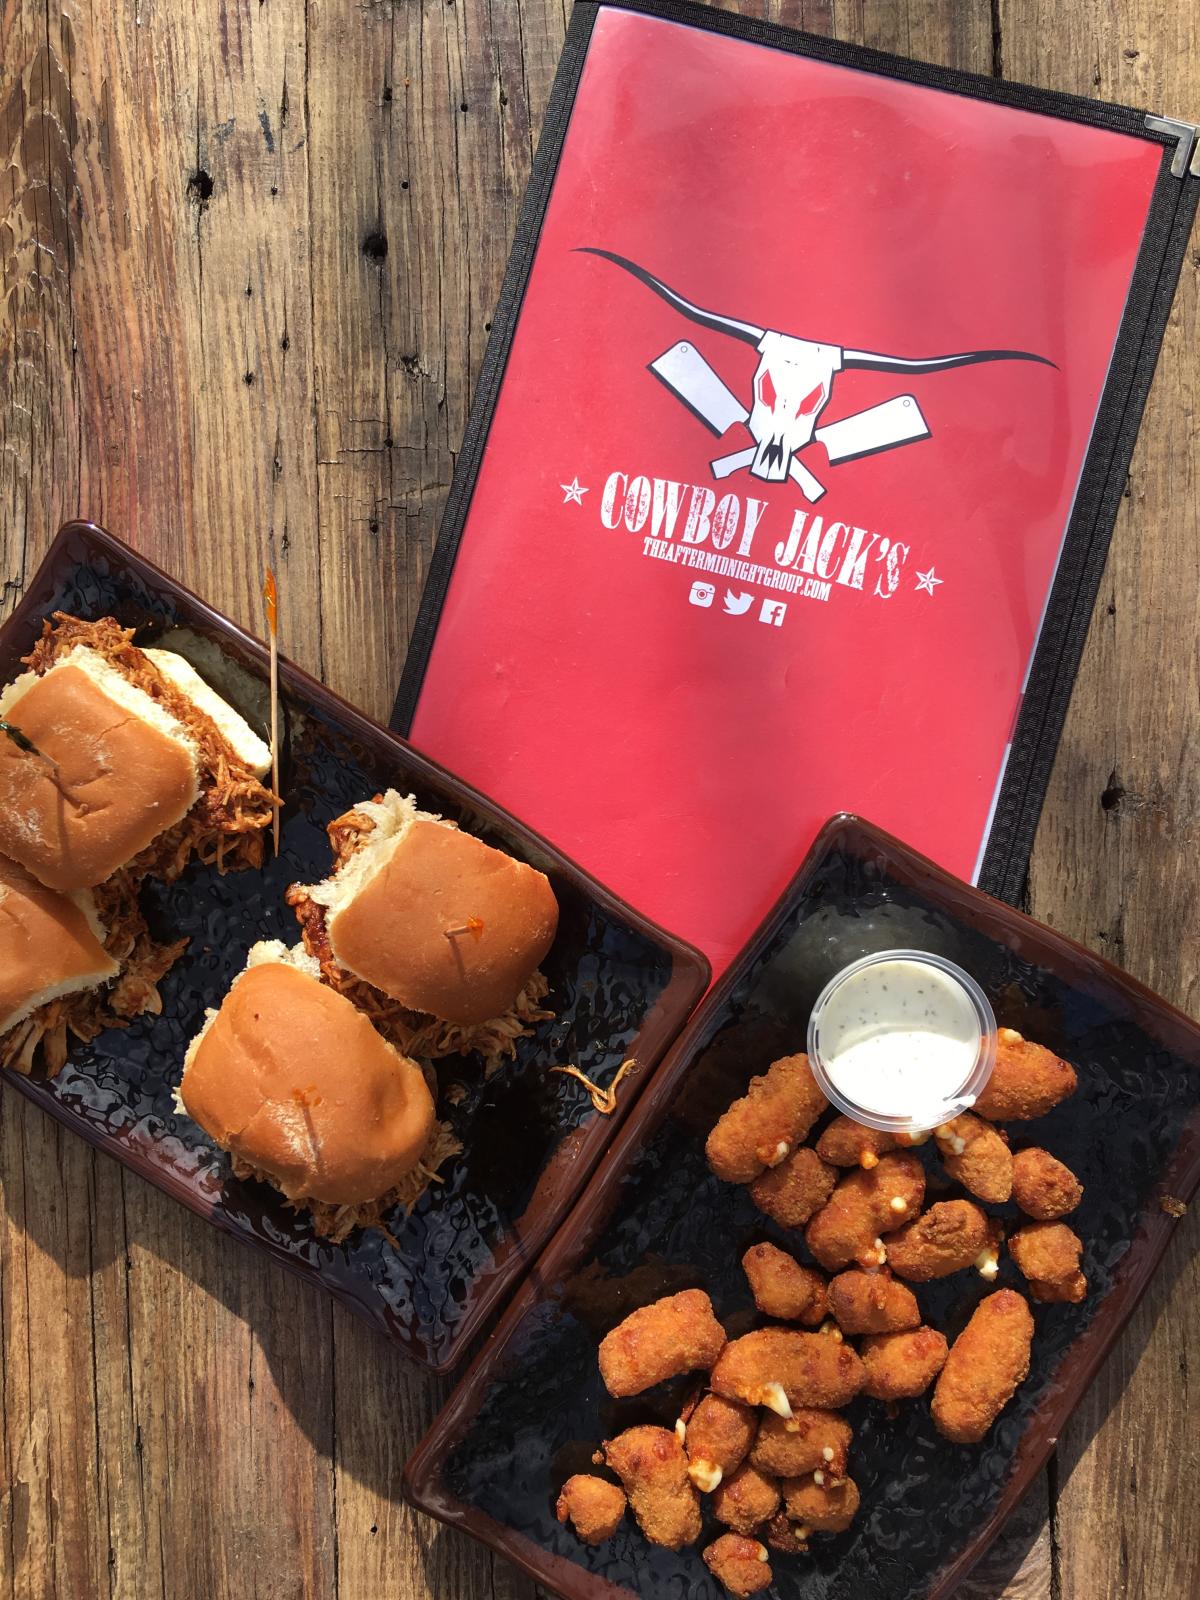 Cowboy Jack's pork sliders and cheese curds in River Prairie Park